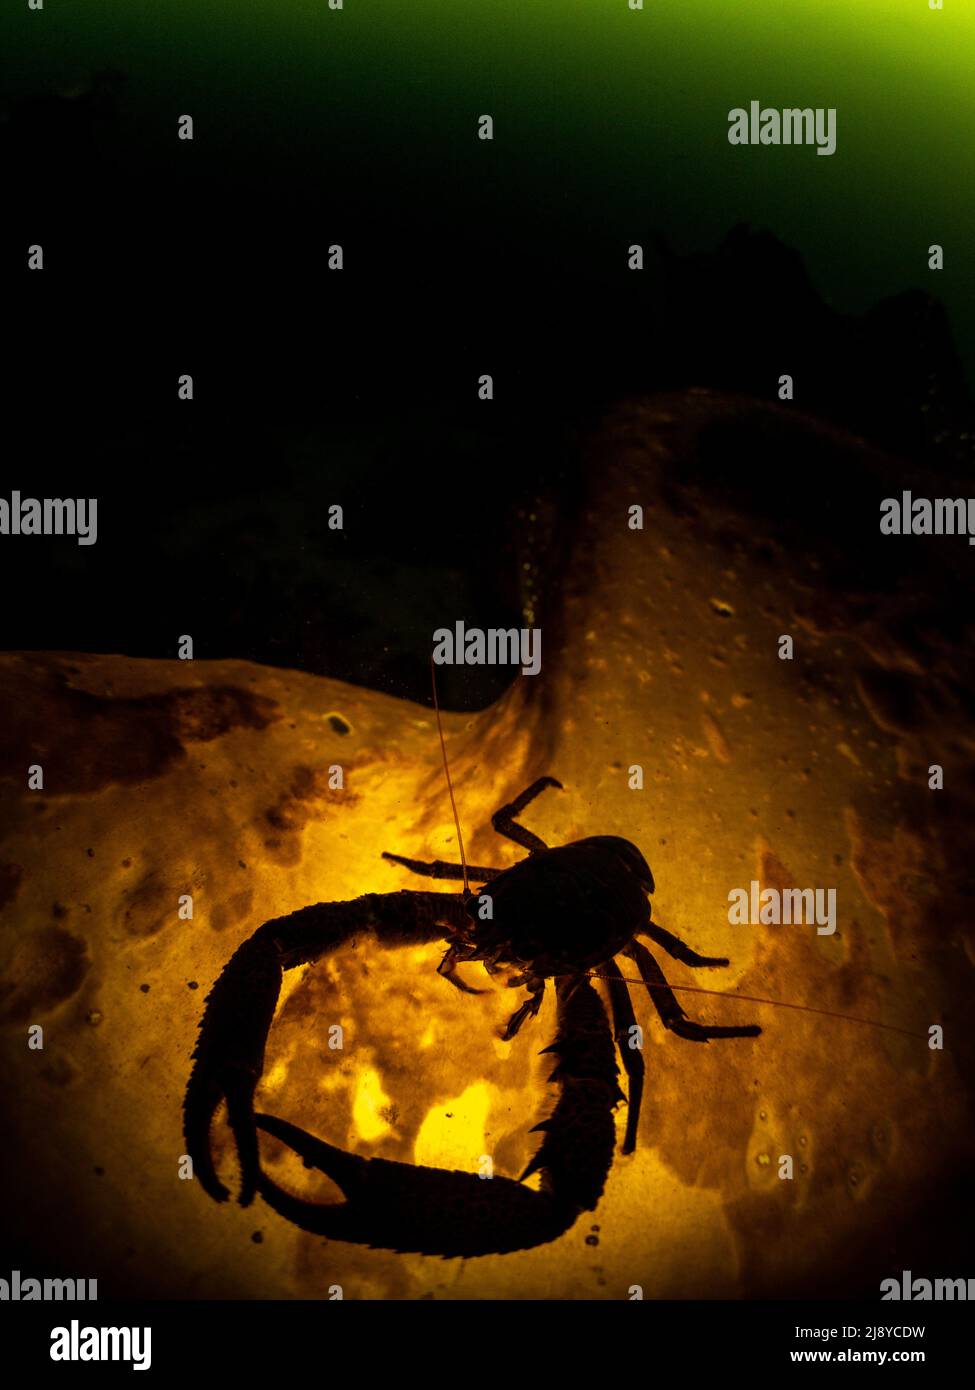 A squat lobster Galathea Strigosa sitting on kelp and lit from below creating a silhouette. Green phytoplankton rich water is visible in the backgroun Stock Photo